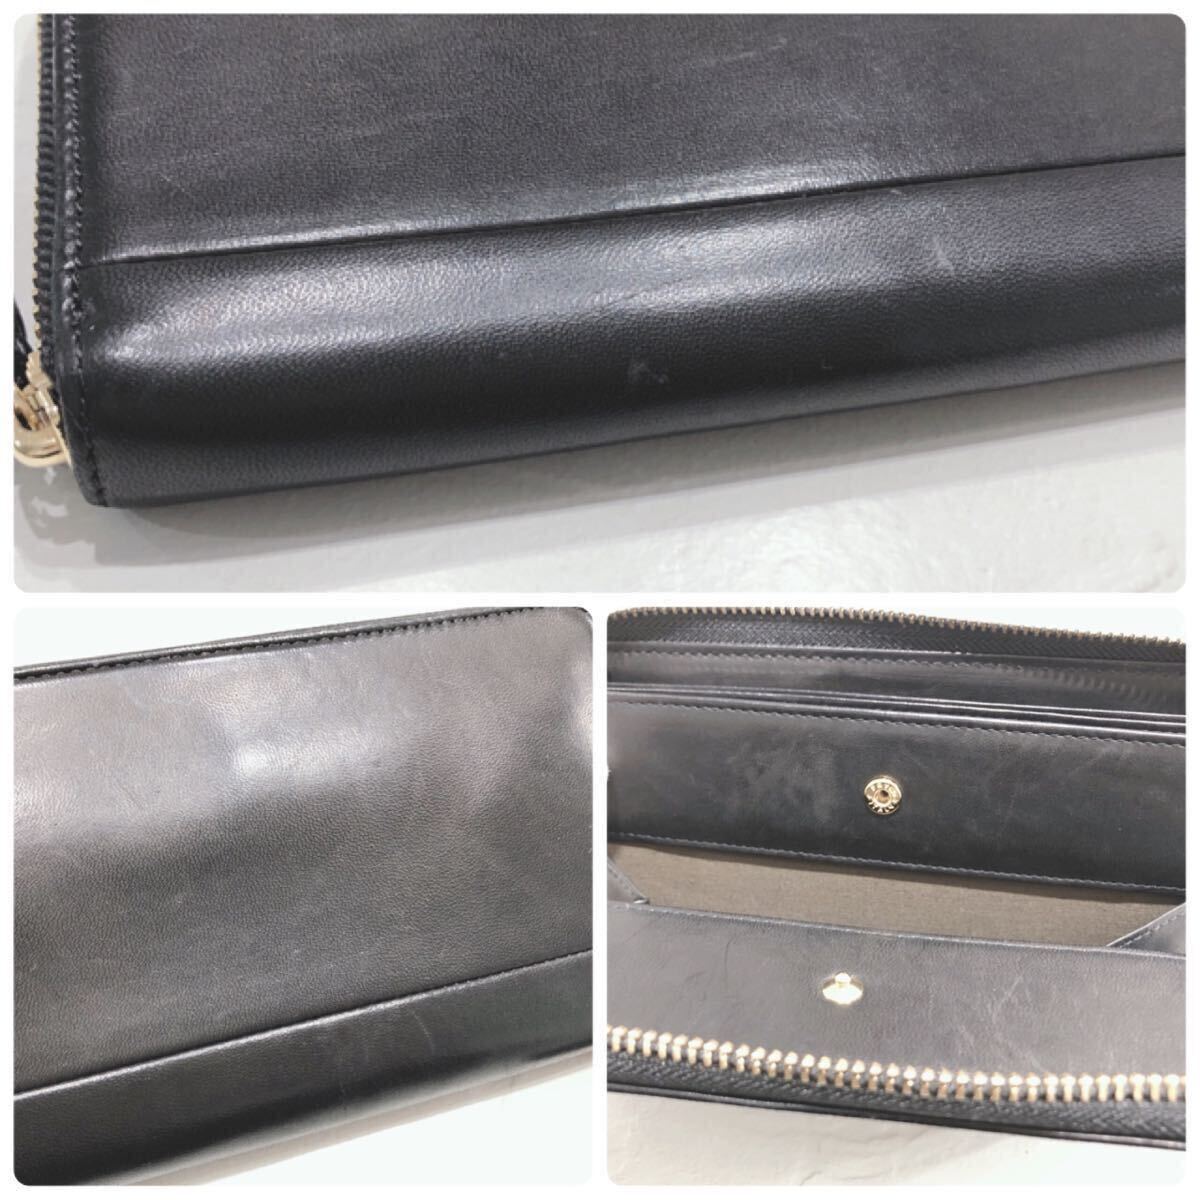 * beautiful goods * PORTER Porter long wallet purse wallet black black leather horse leather original leather round Zip tag attaching storage box free shipping 